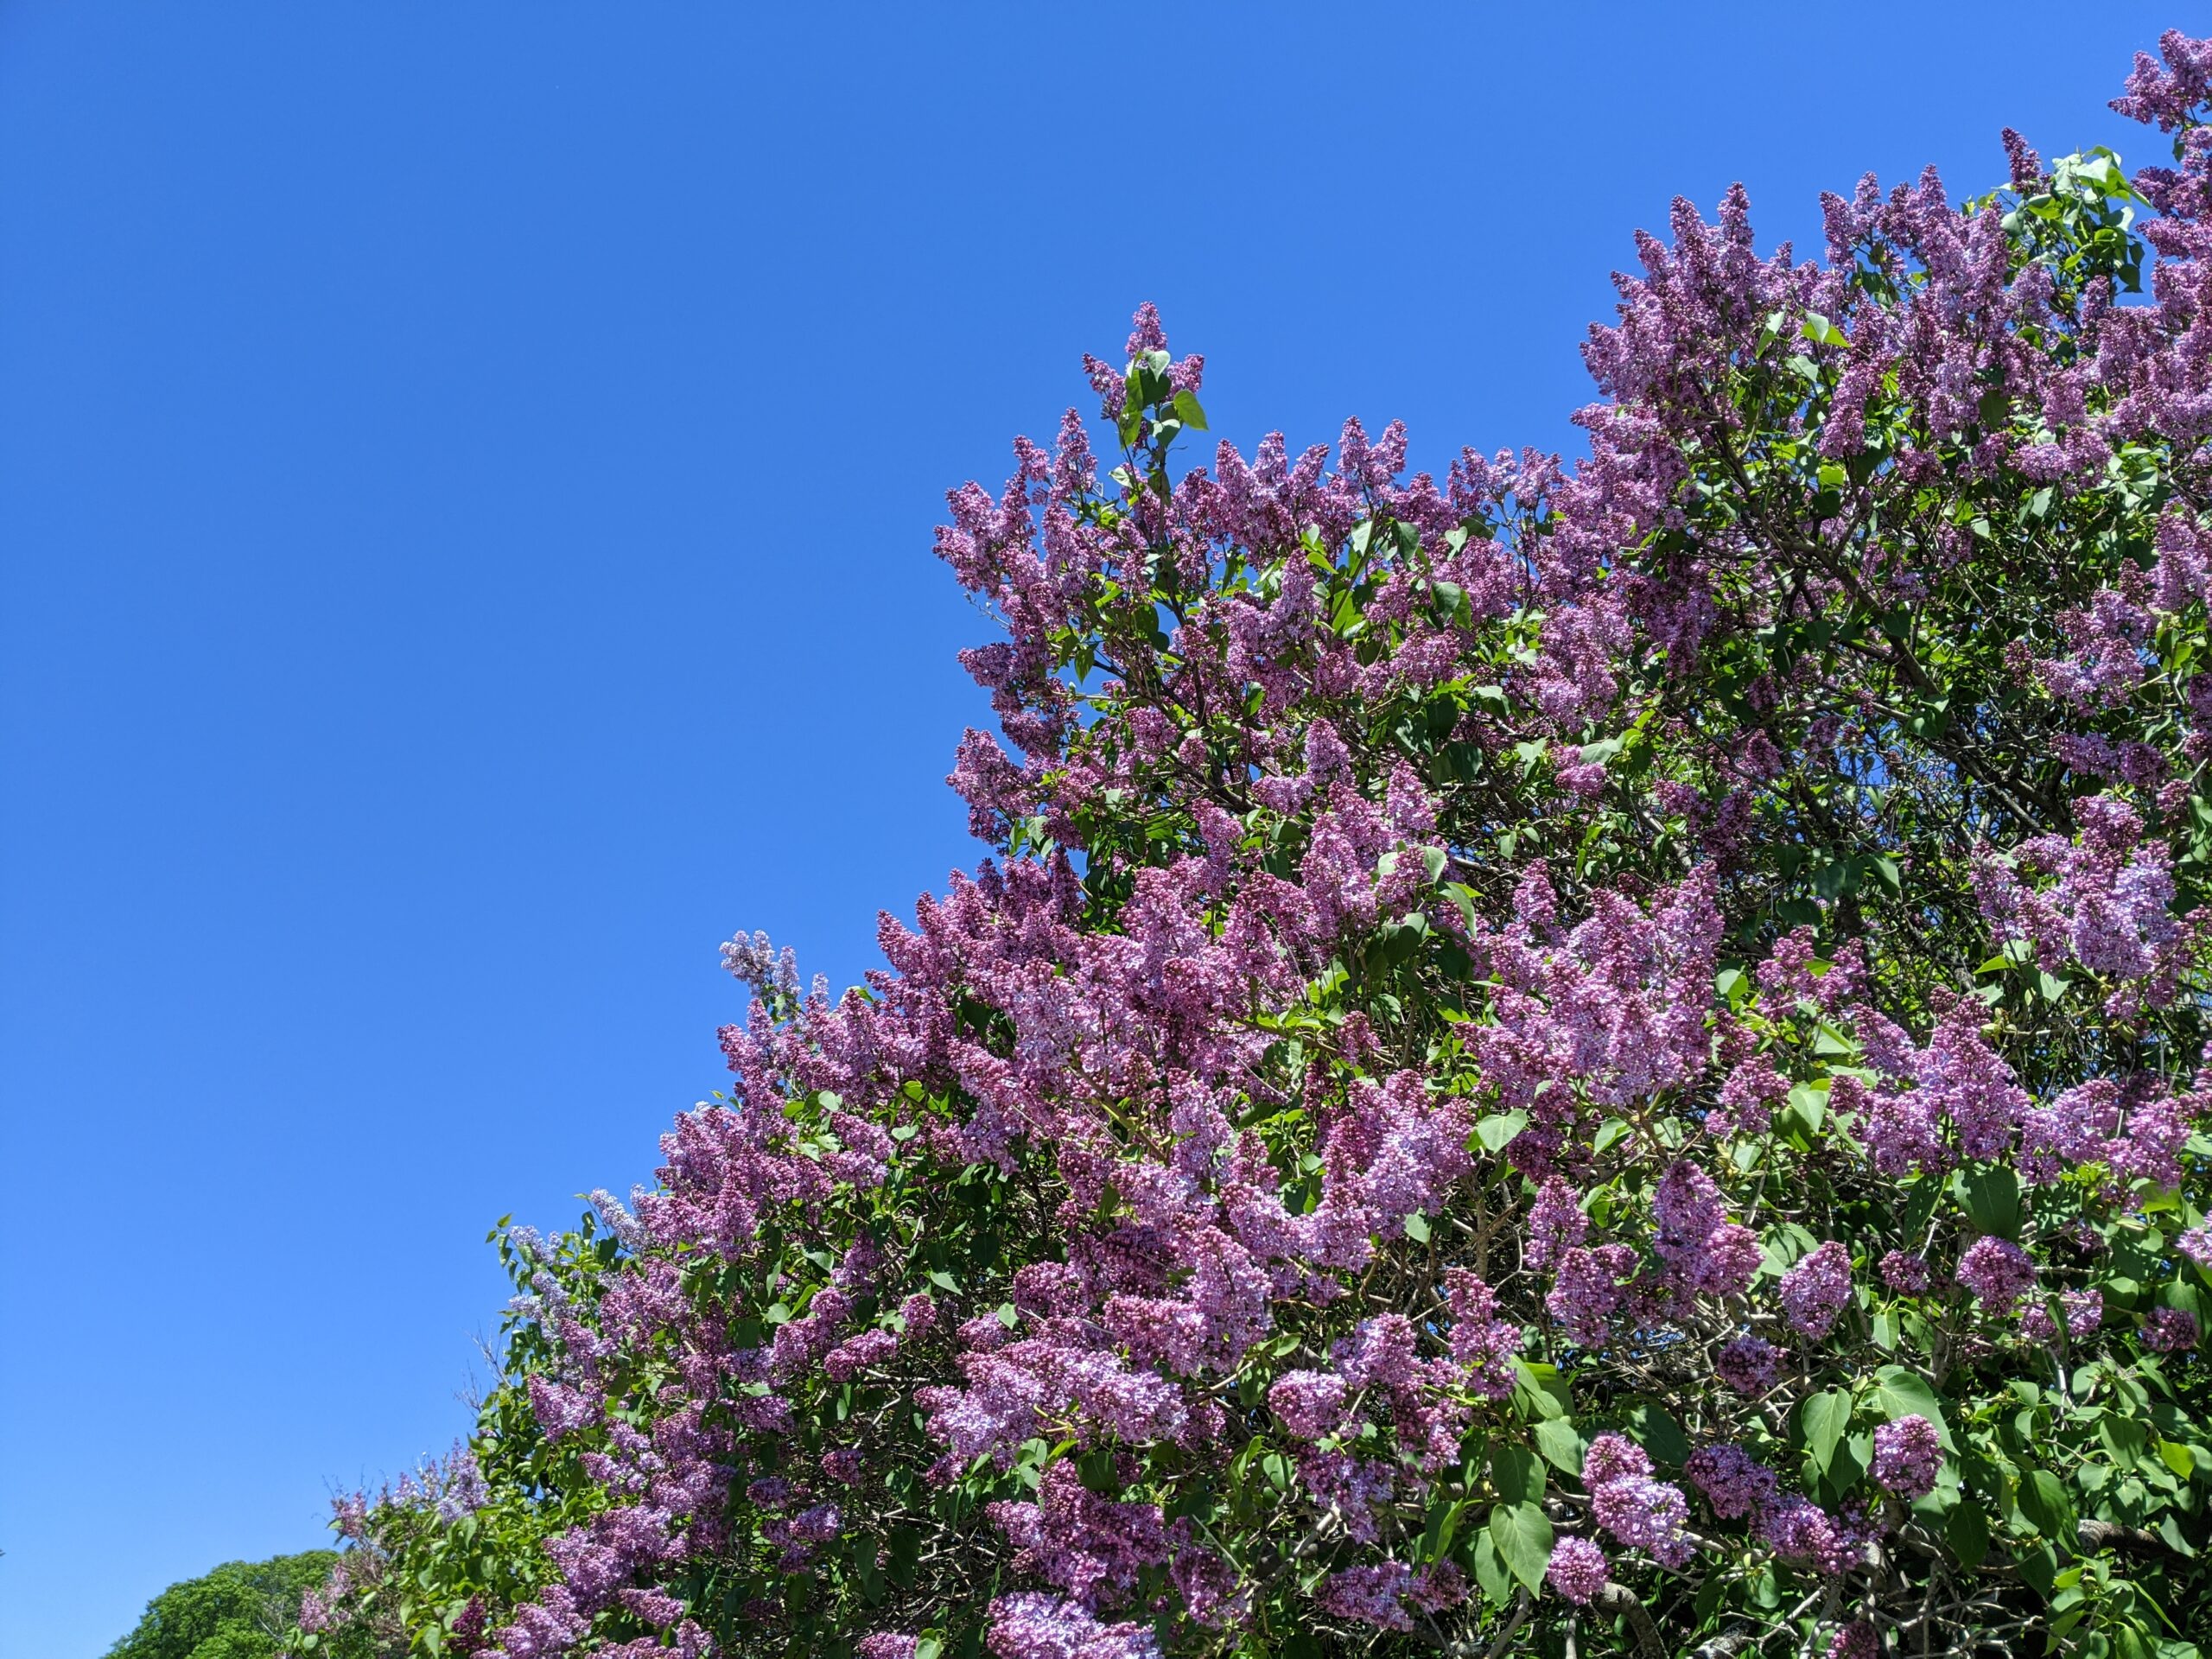 A blooming lilac tree against a deep blue sky.